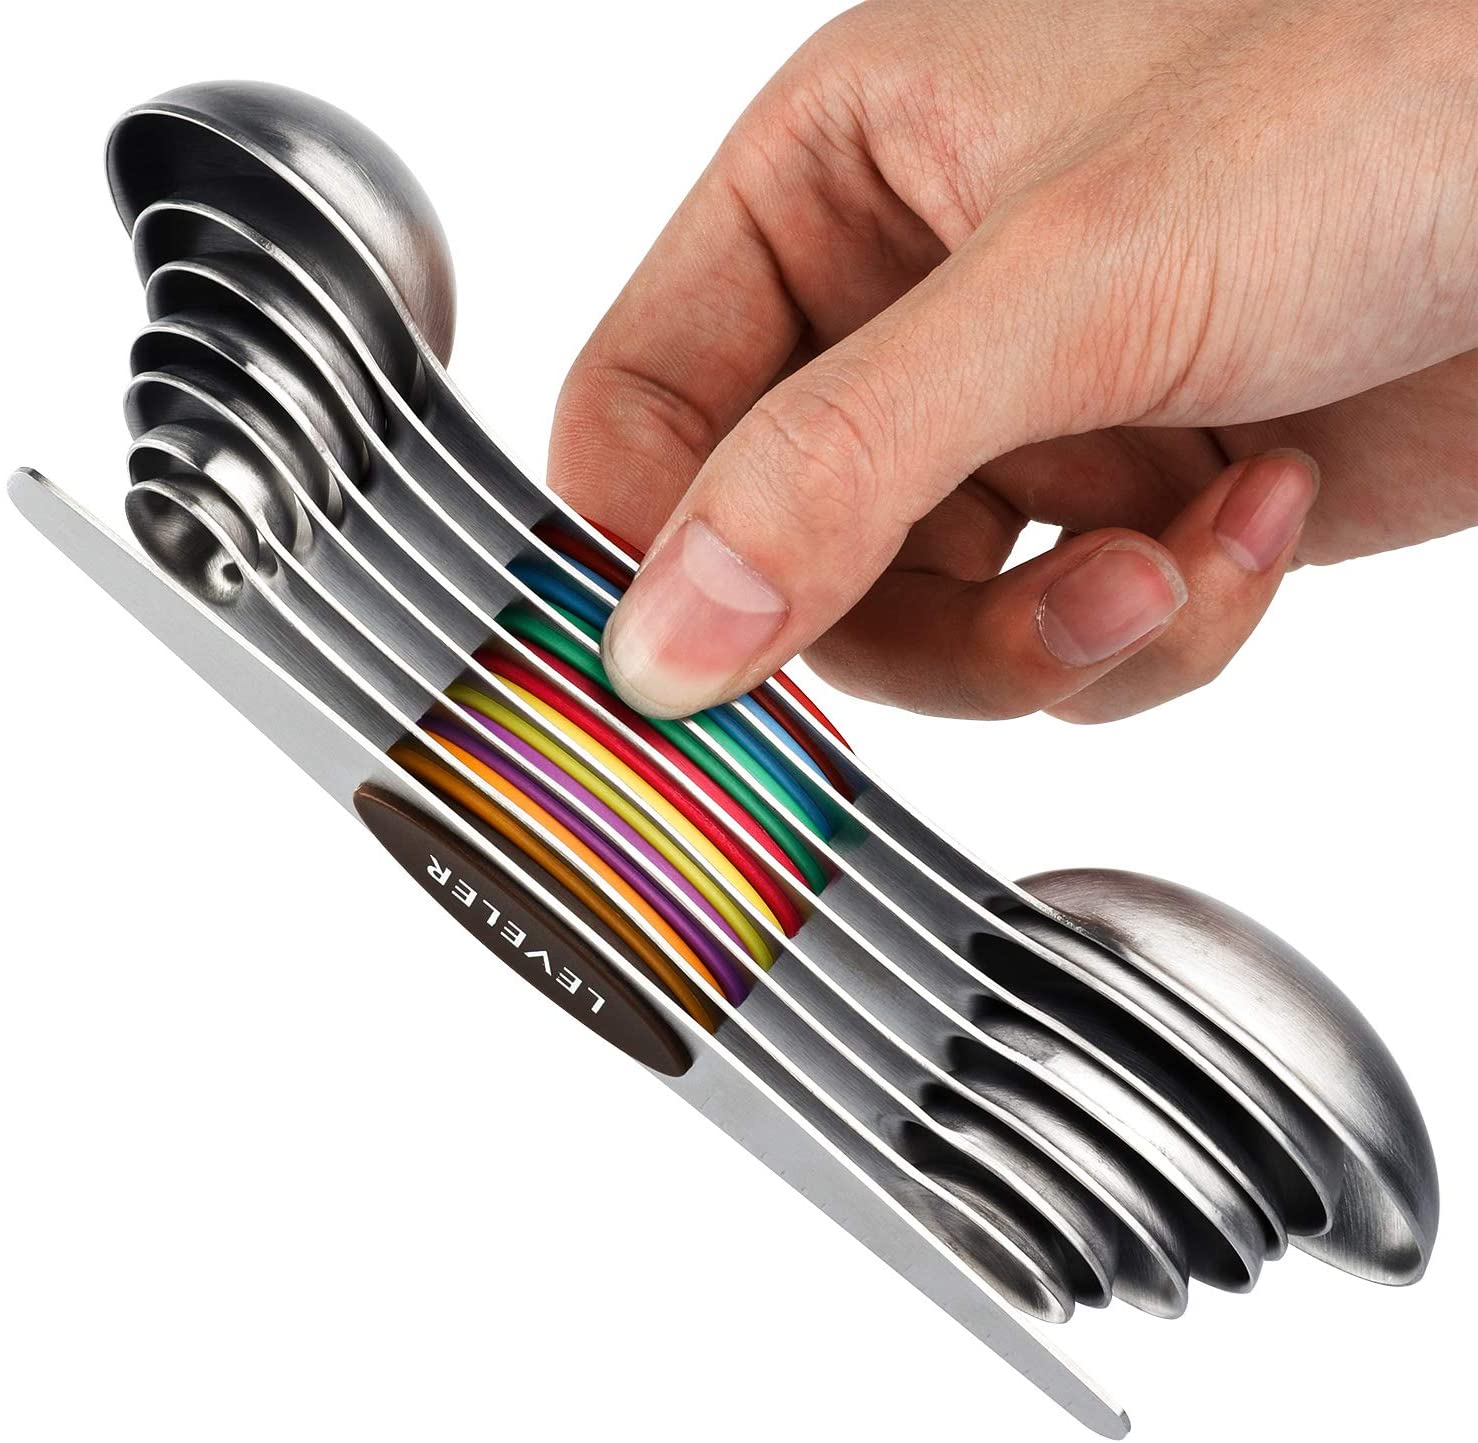 7. YellRin Magnetic Measuring Spoons Set